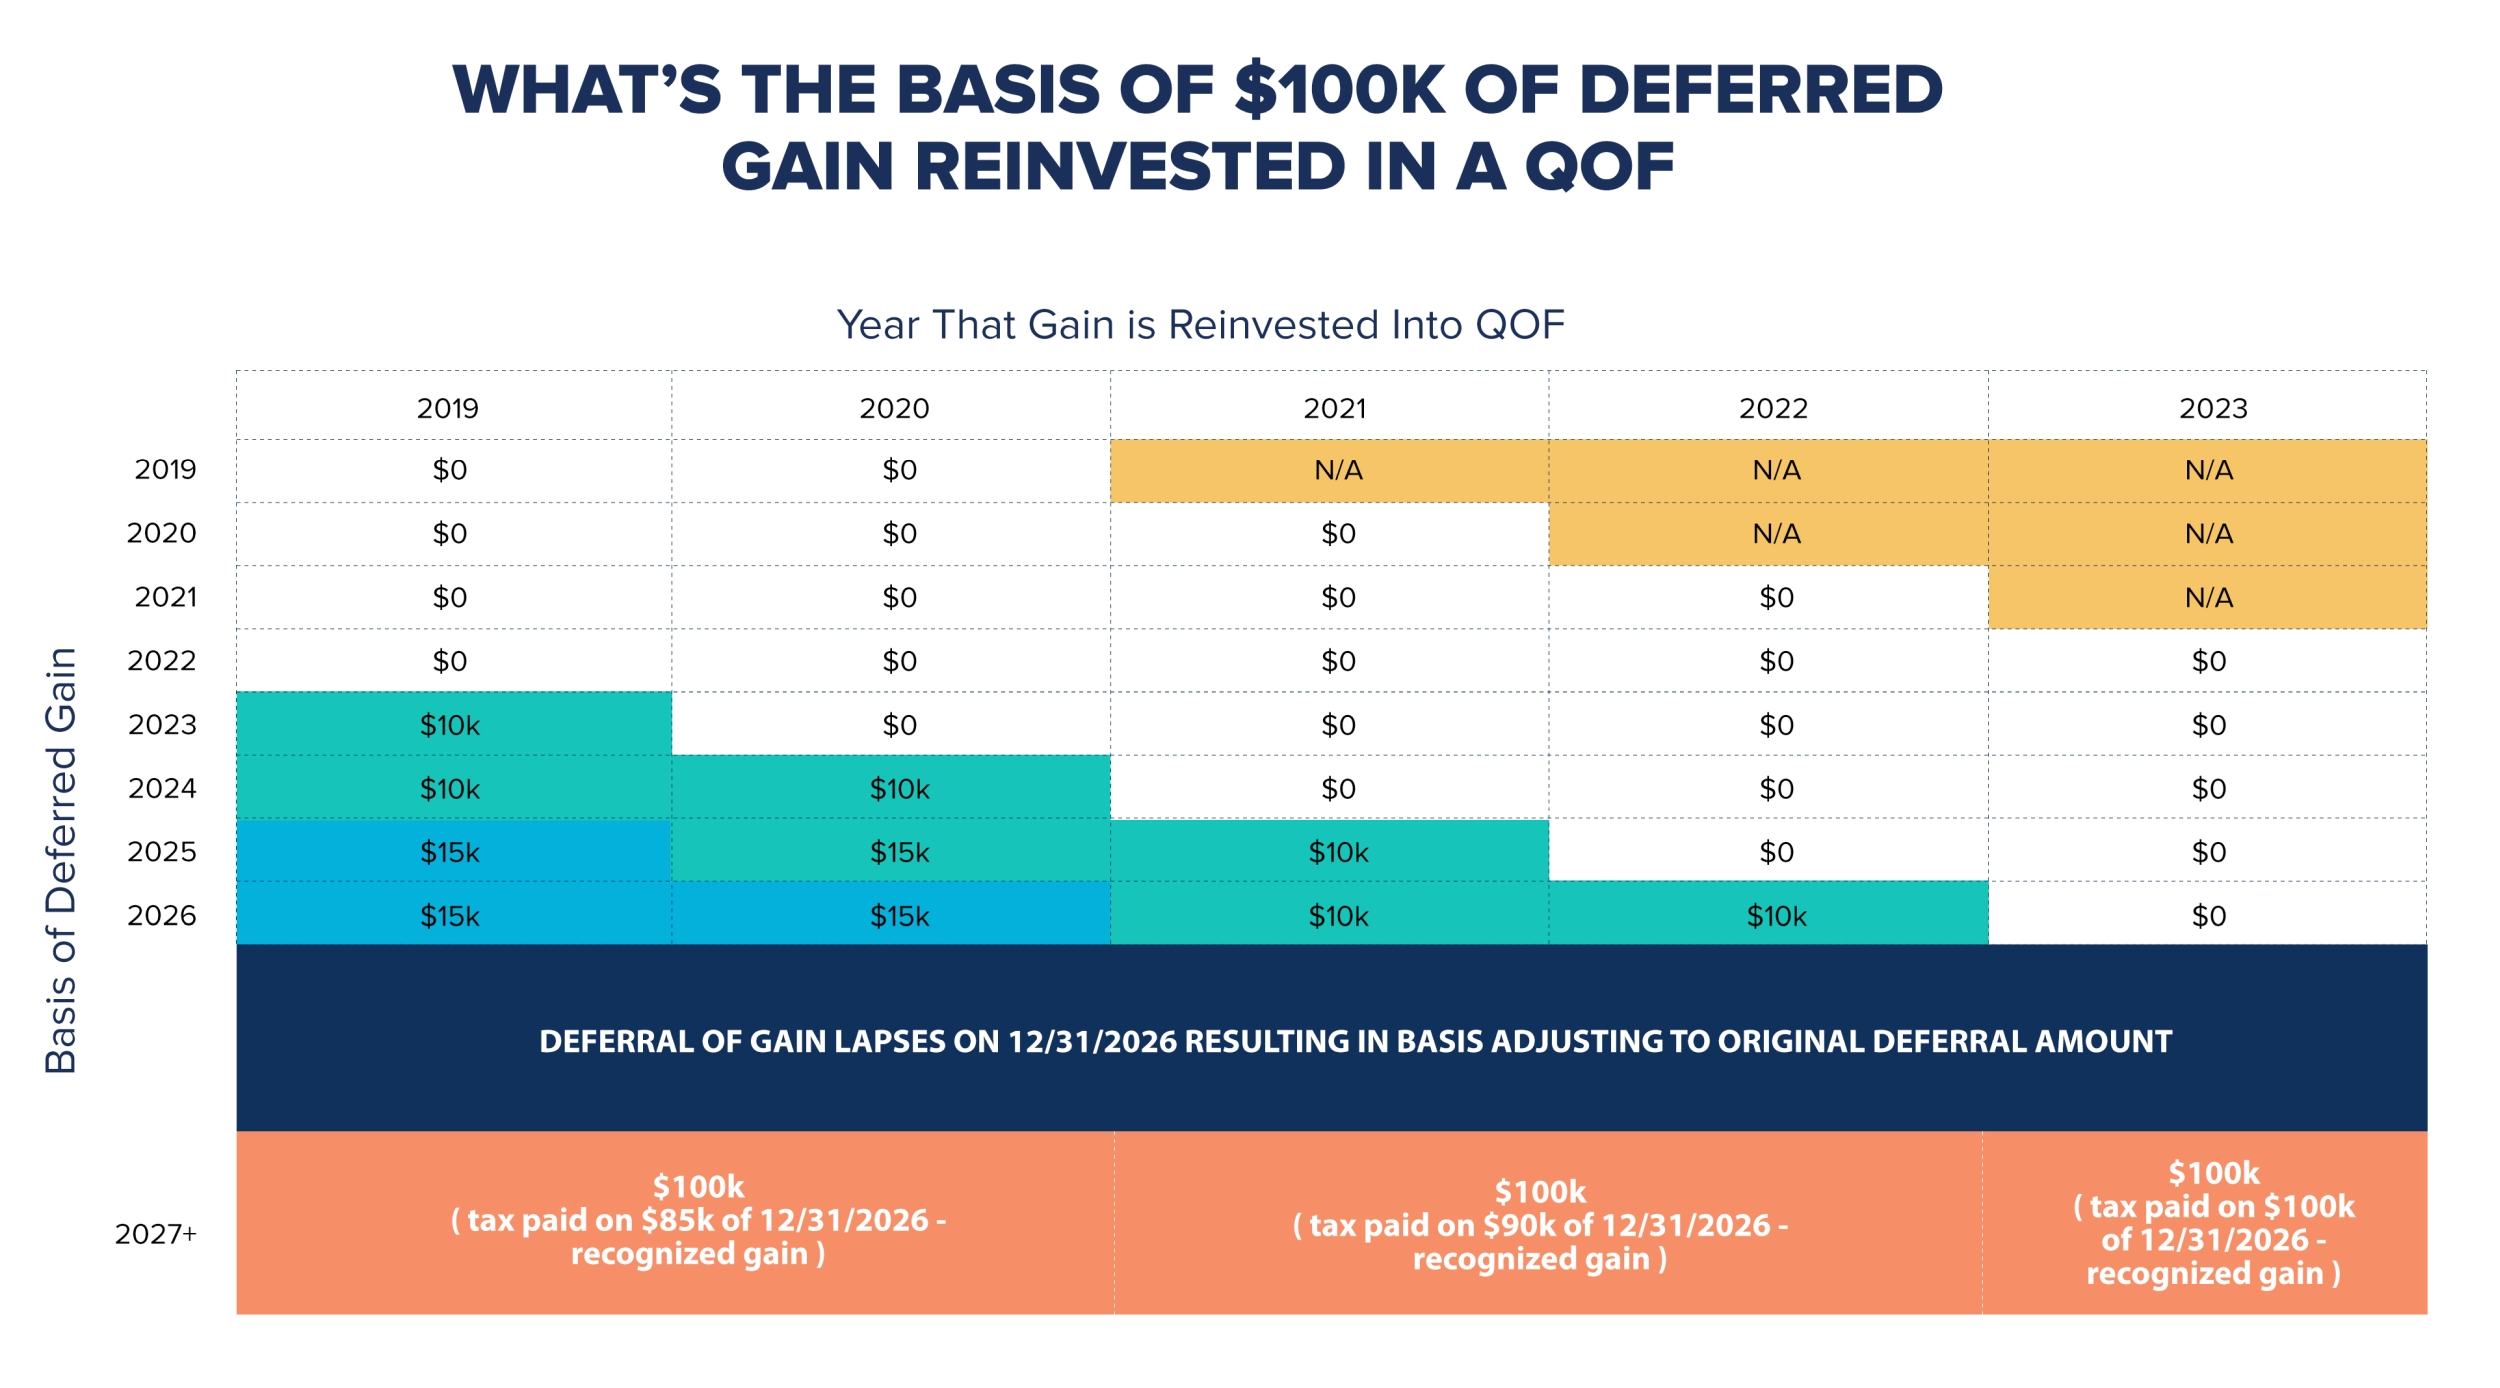 Chart depicting the left-side rows of Deferred Gain, versus top columns of years reinvested into QOF.